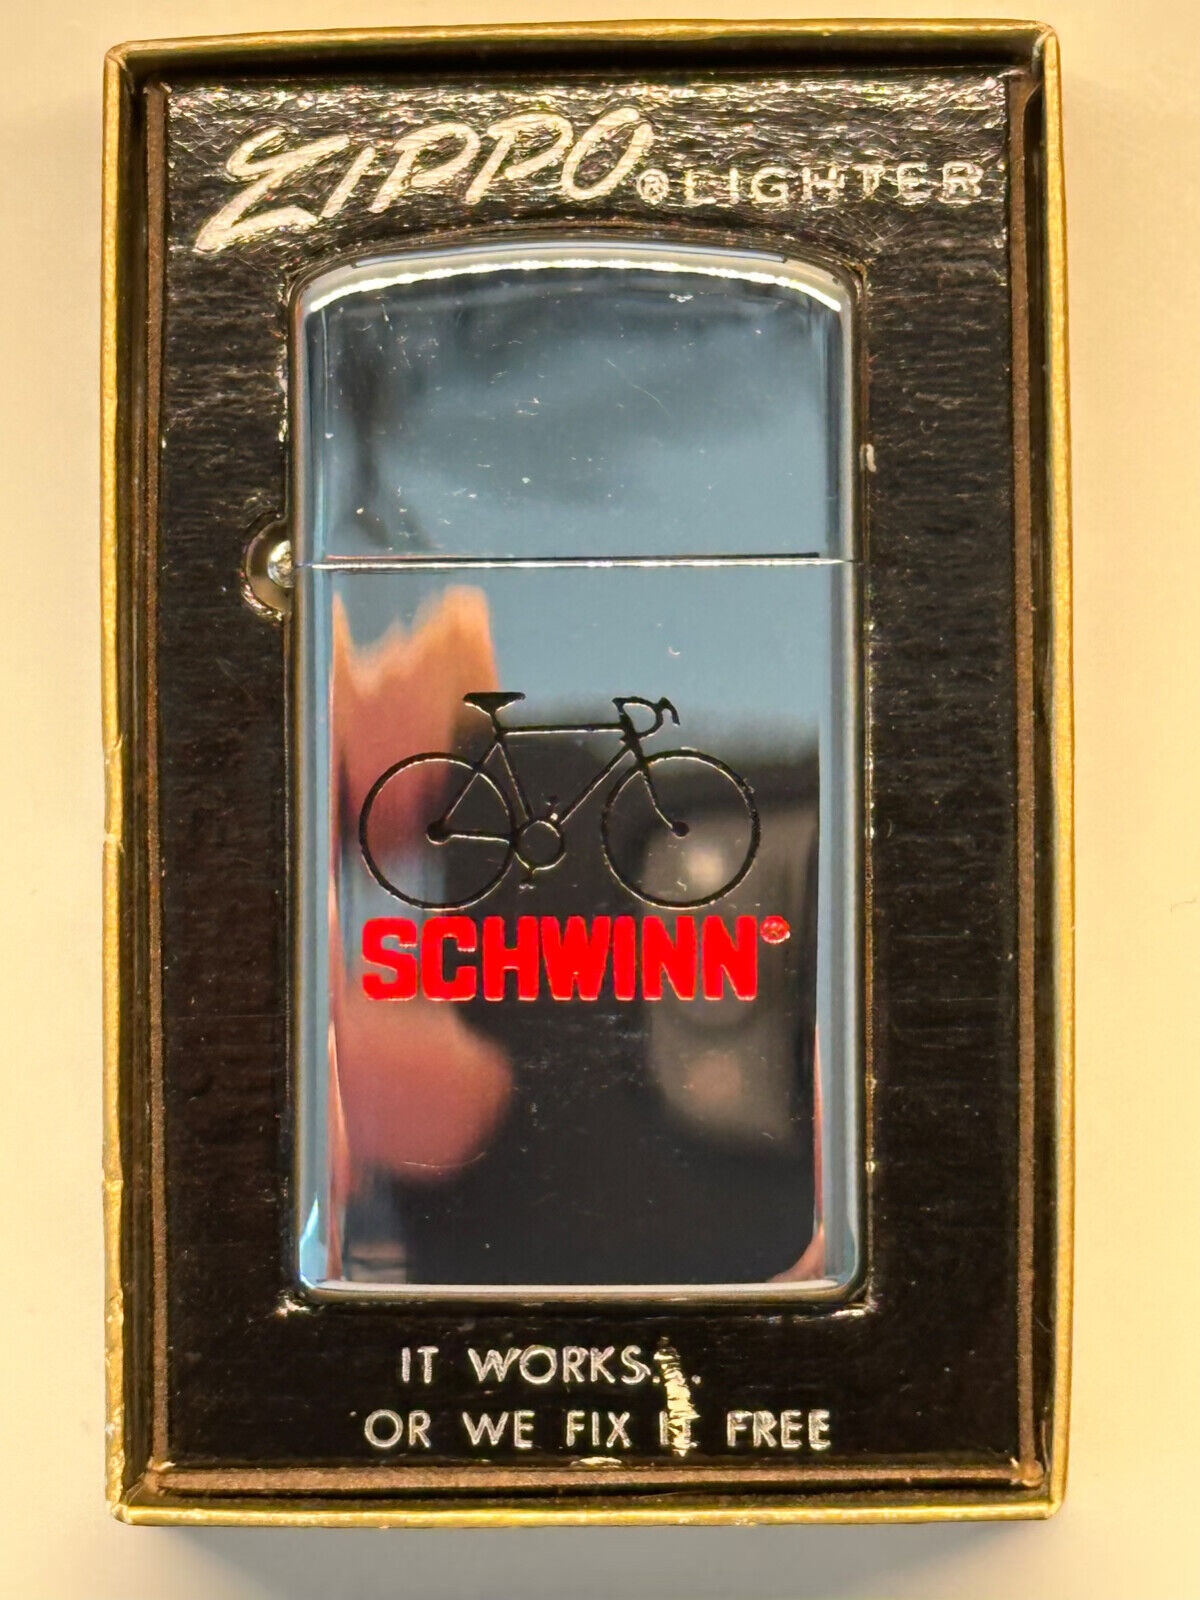 NOS SCHWINN BICYCLE CO. LIGHTER, MADE IN USA BY ZIPPO